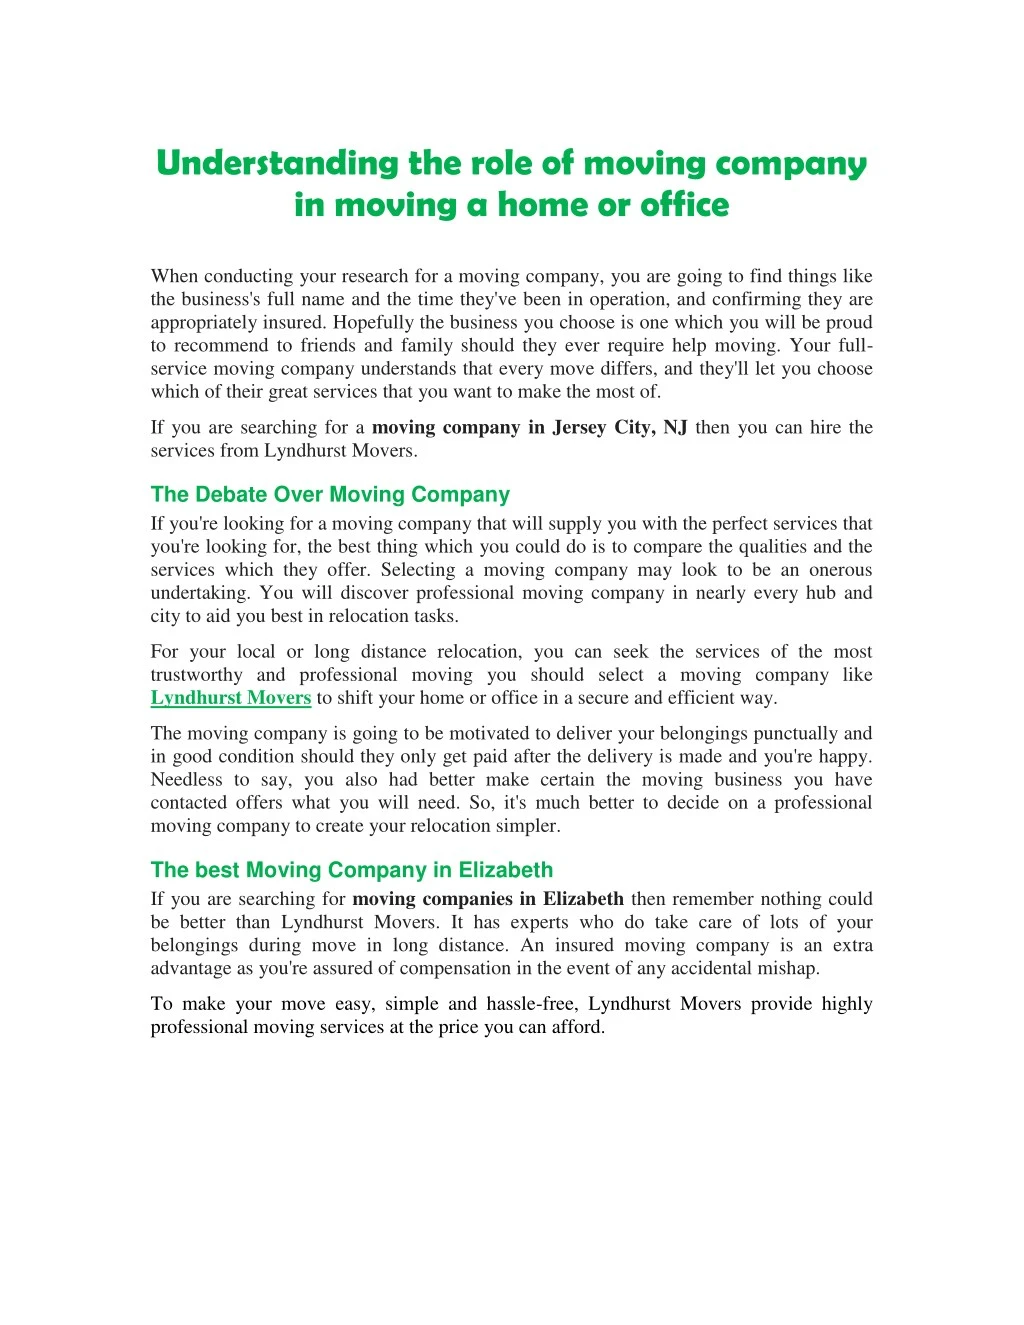 understanding the role of moving company